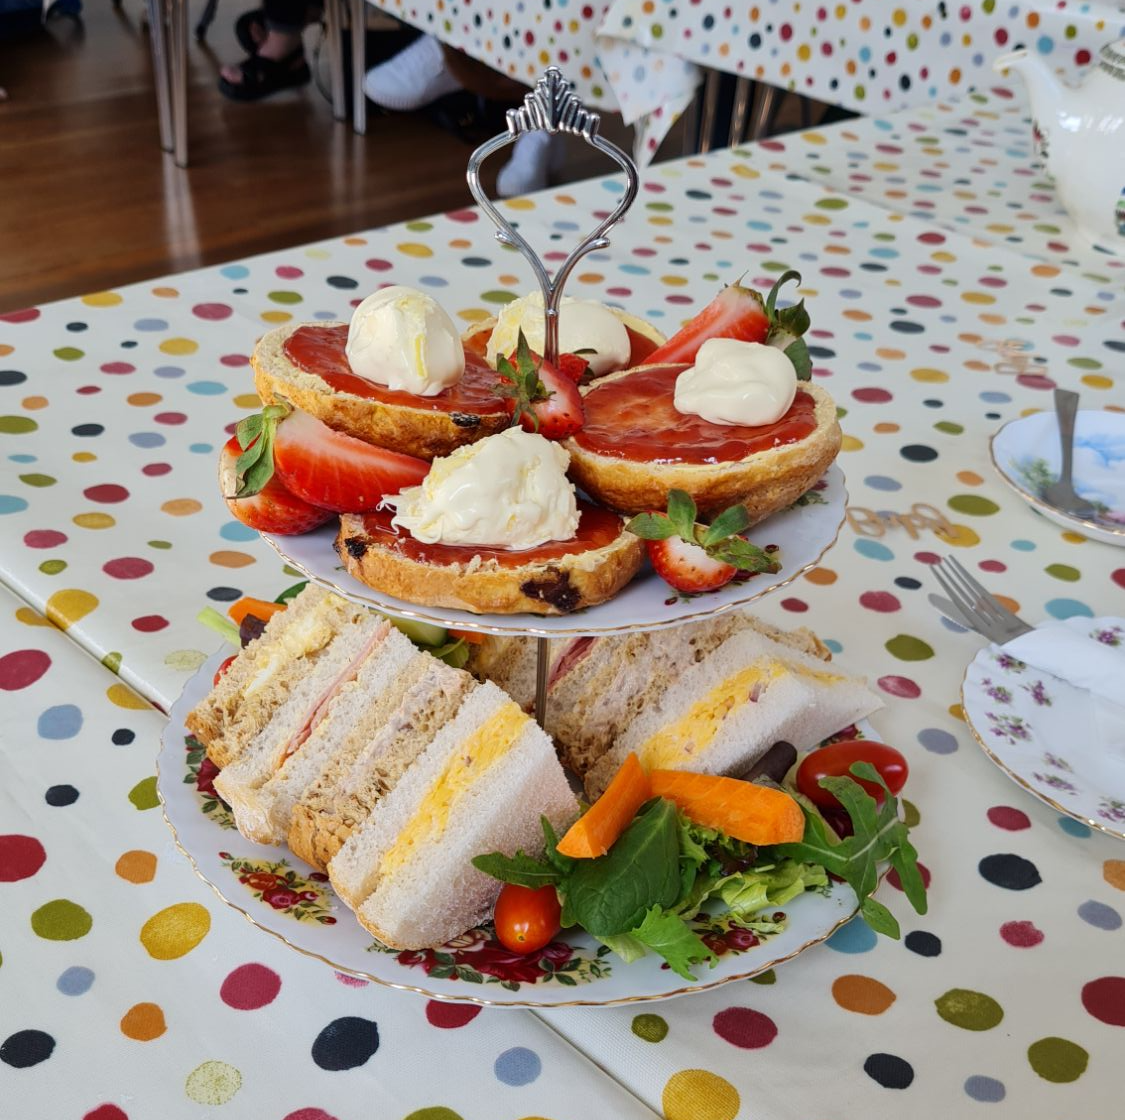 A tiered cupcake stand on a table with a spotted tablecloth. The top tier has jam and cream scones and strawberries on it, and the bottom tier has various sandwiches and salad on it.